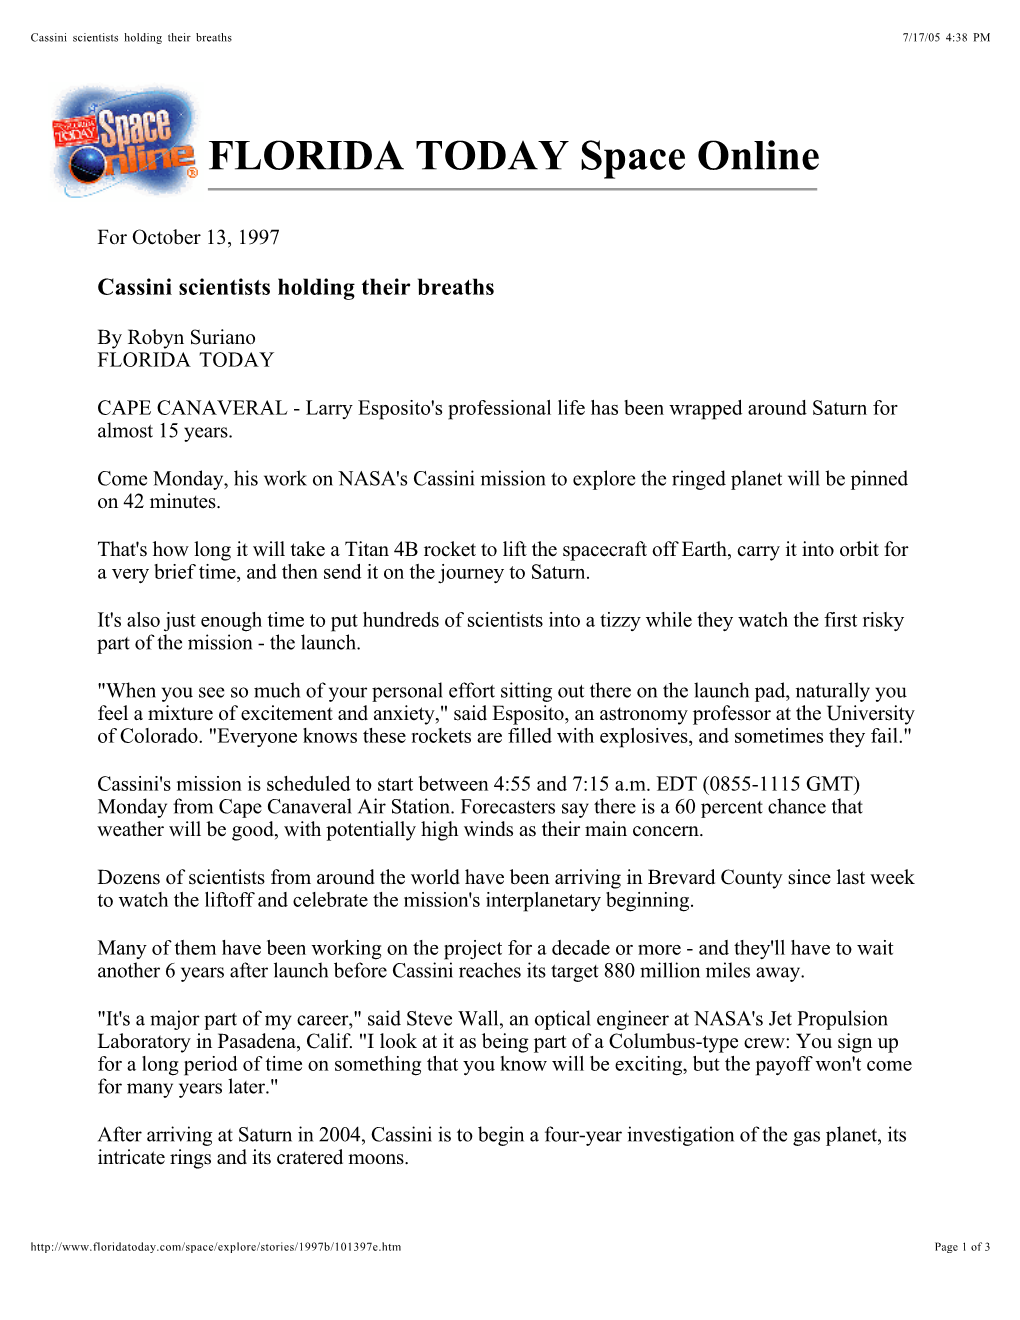 FLORIDA TODAY Space Online